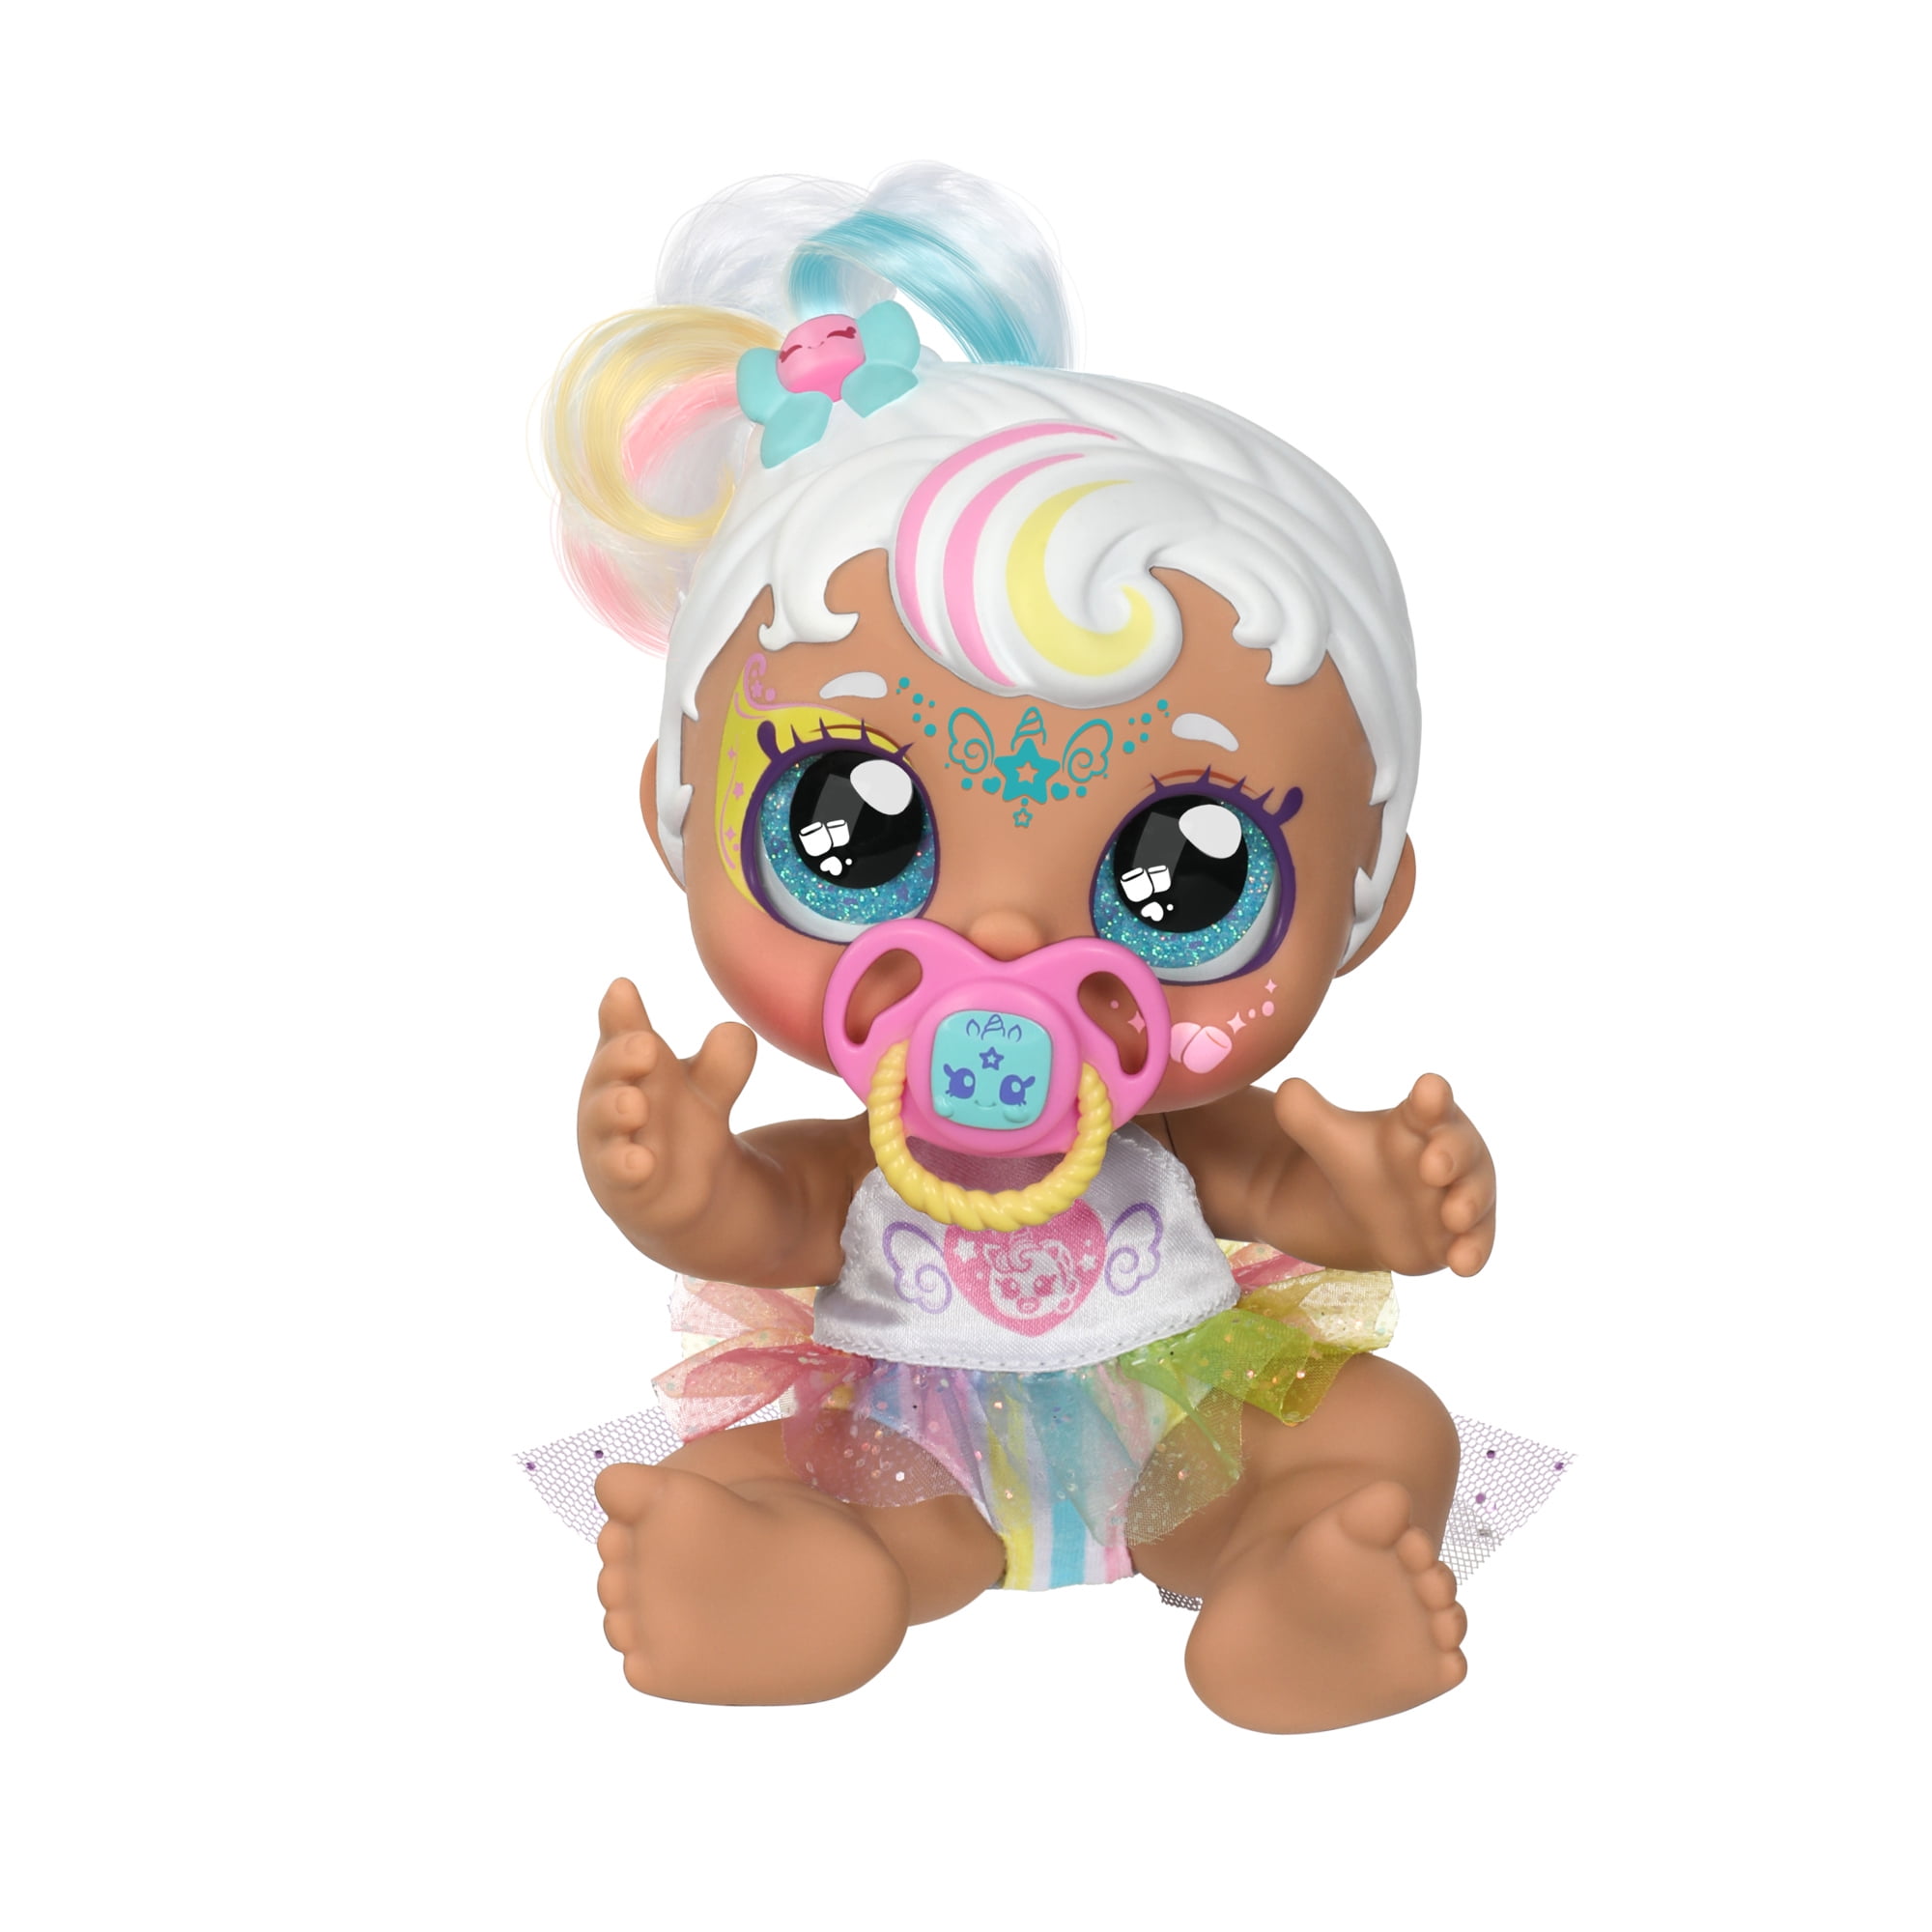 Kindi Kids Magic Baby Sister Doll Mini Mello Unicorn with Face Paint Reveal, Child, Ages 3+